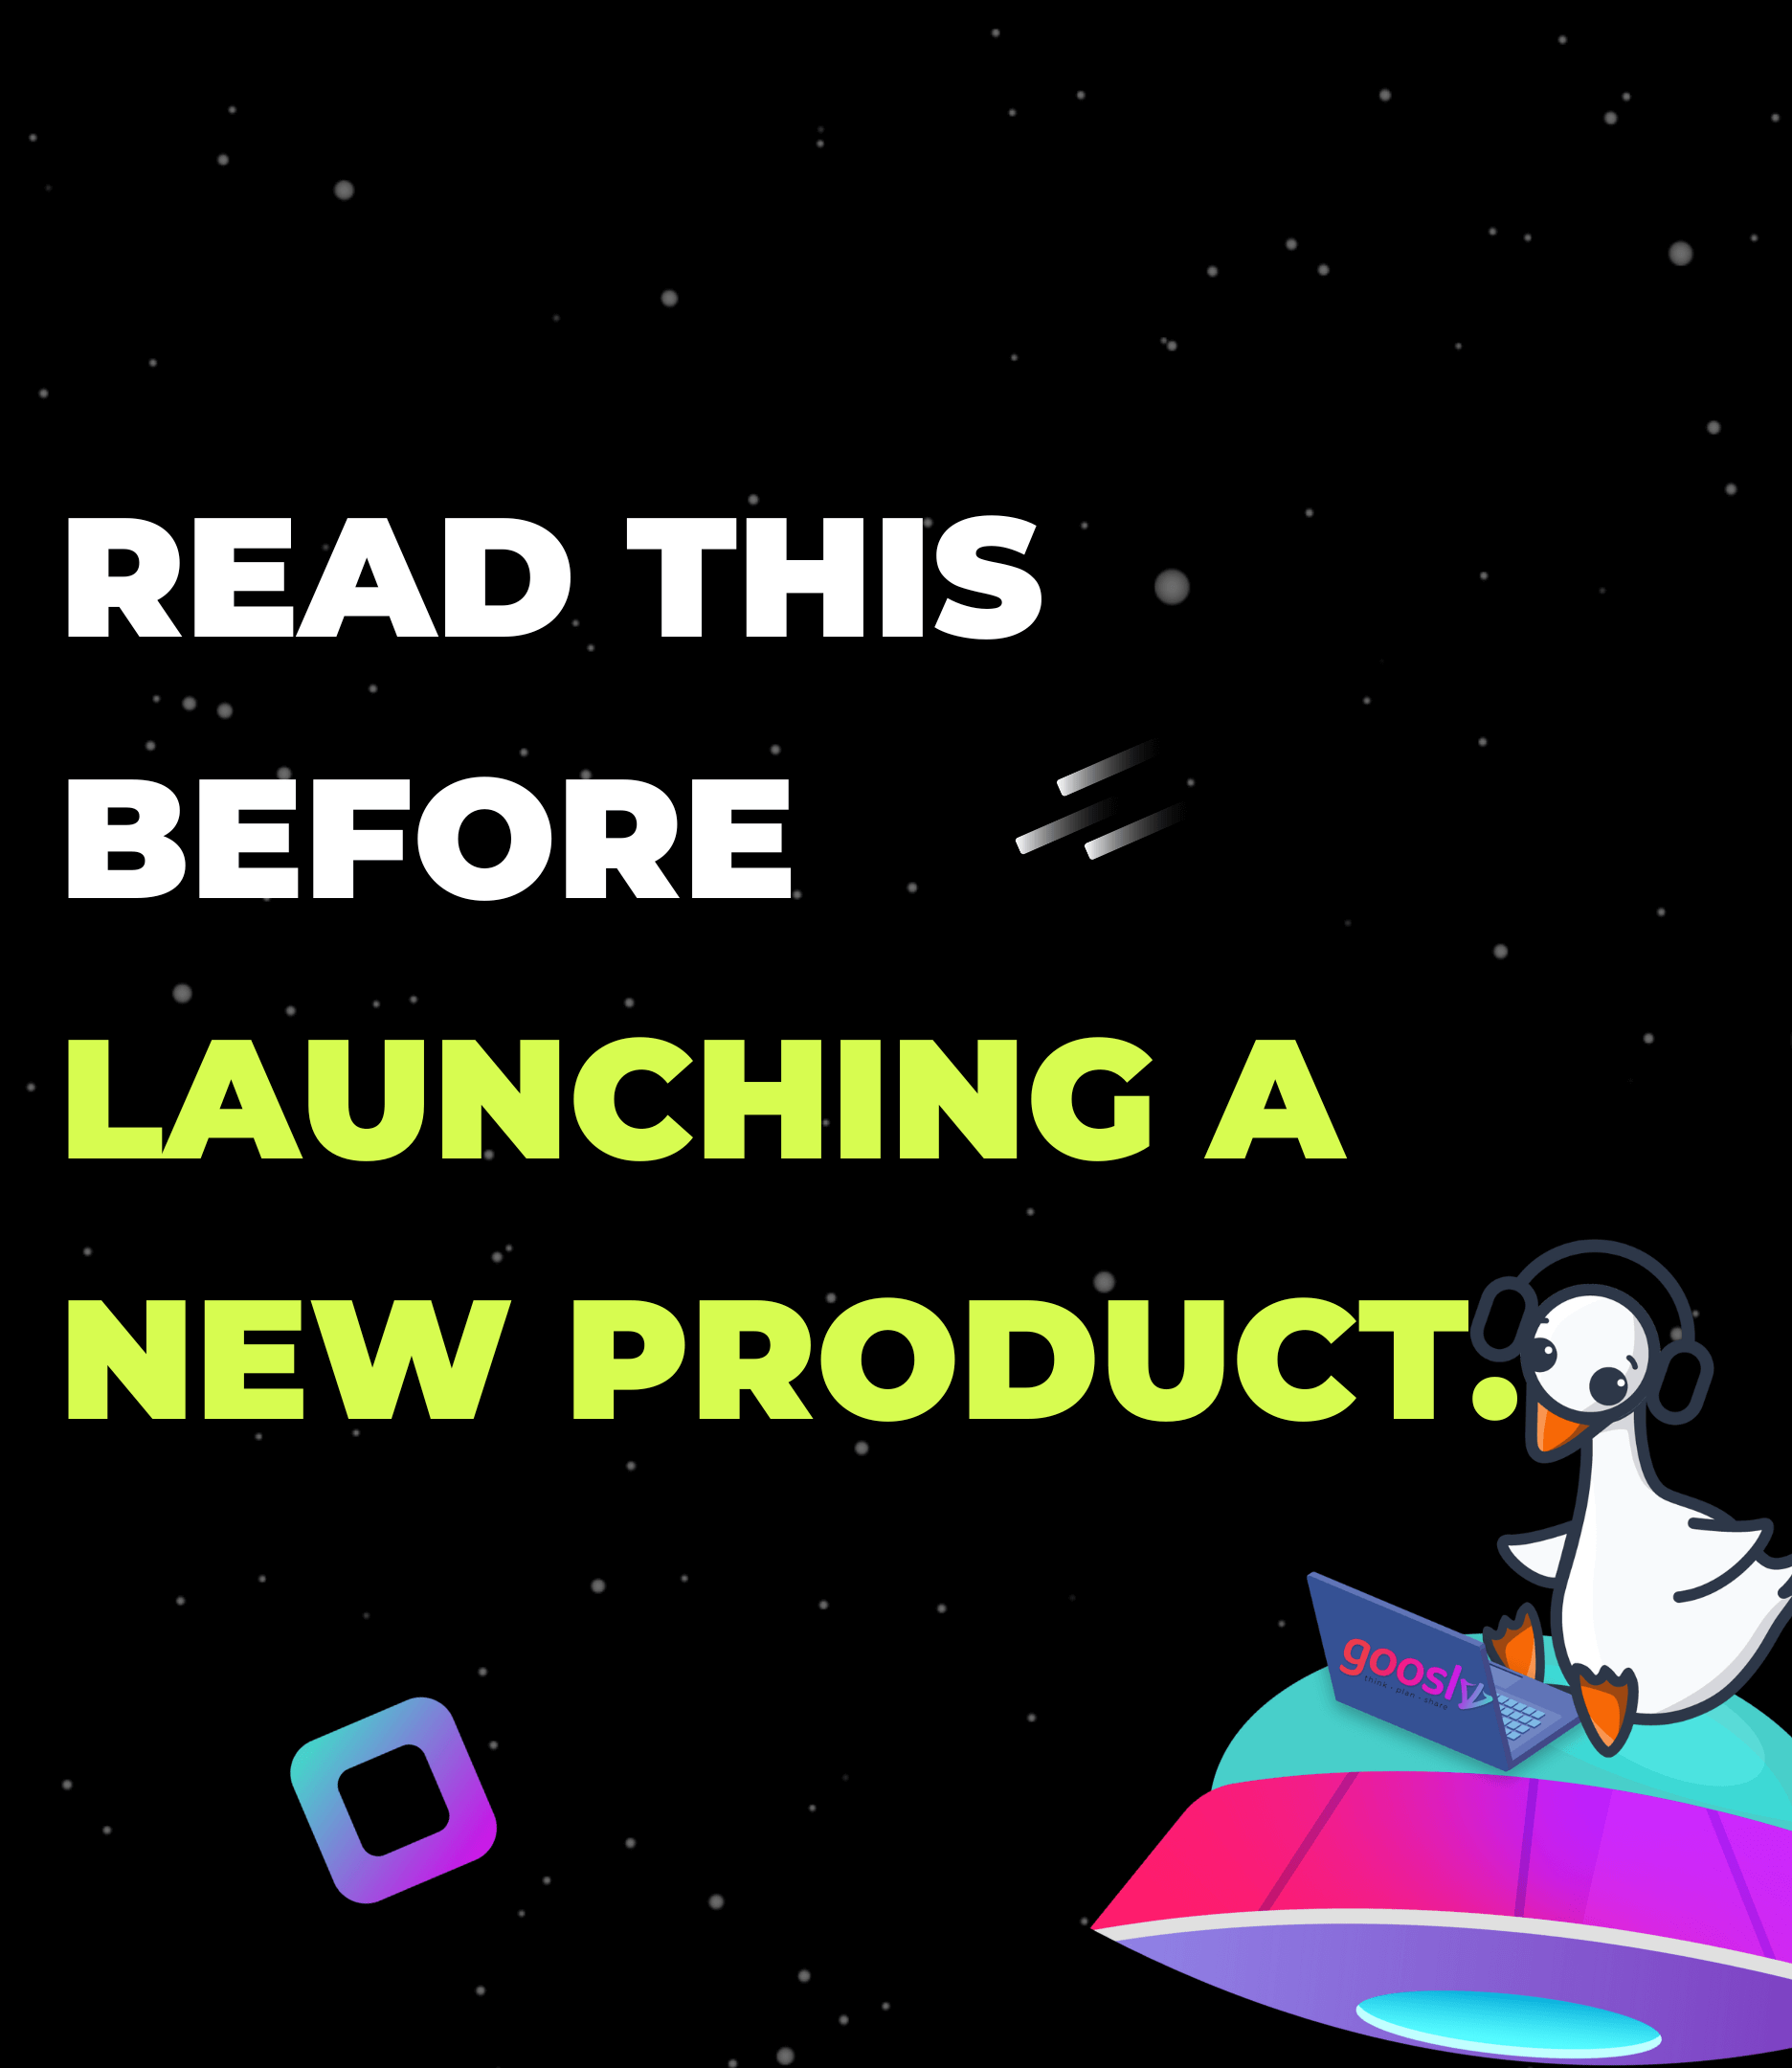 Tips on what to avoid for a successful product launch.